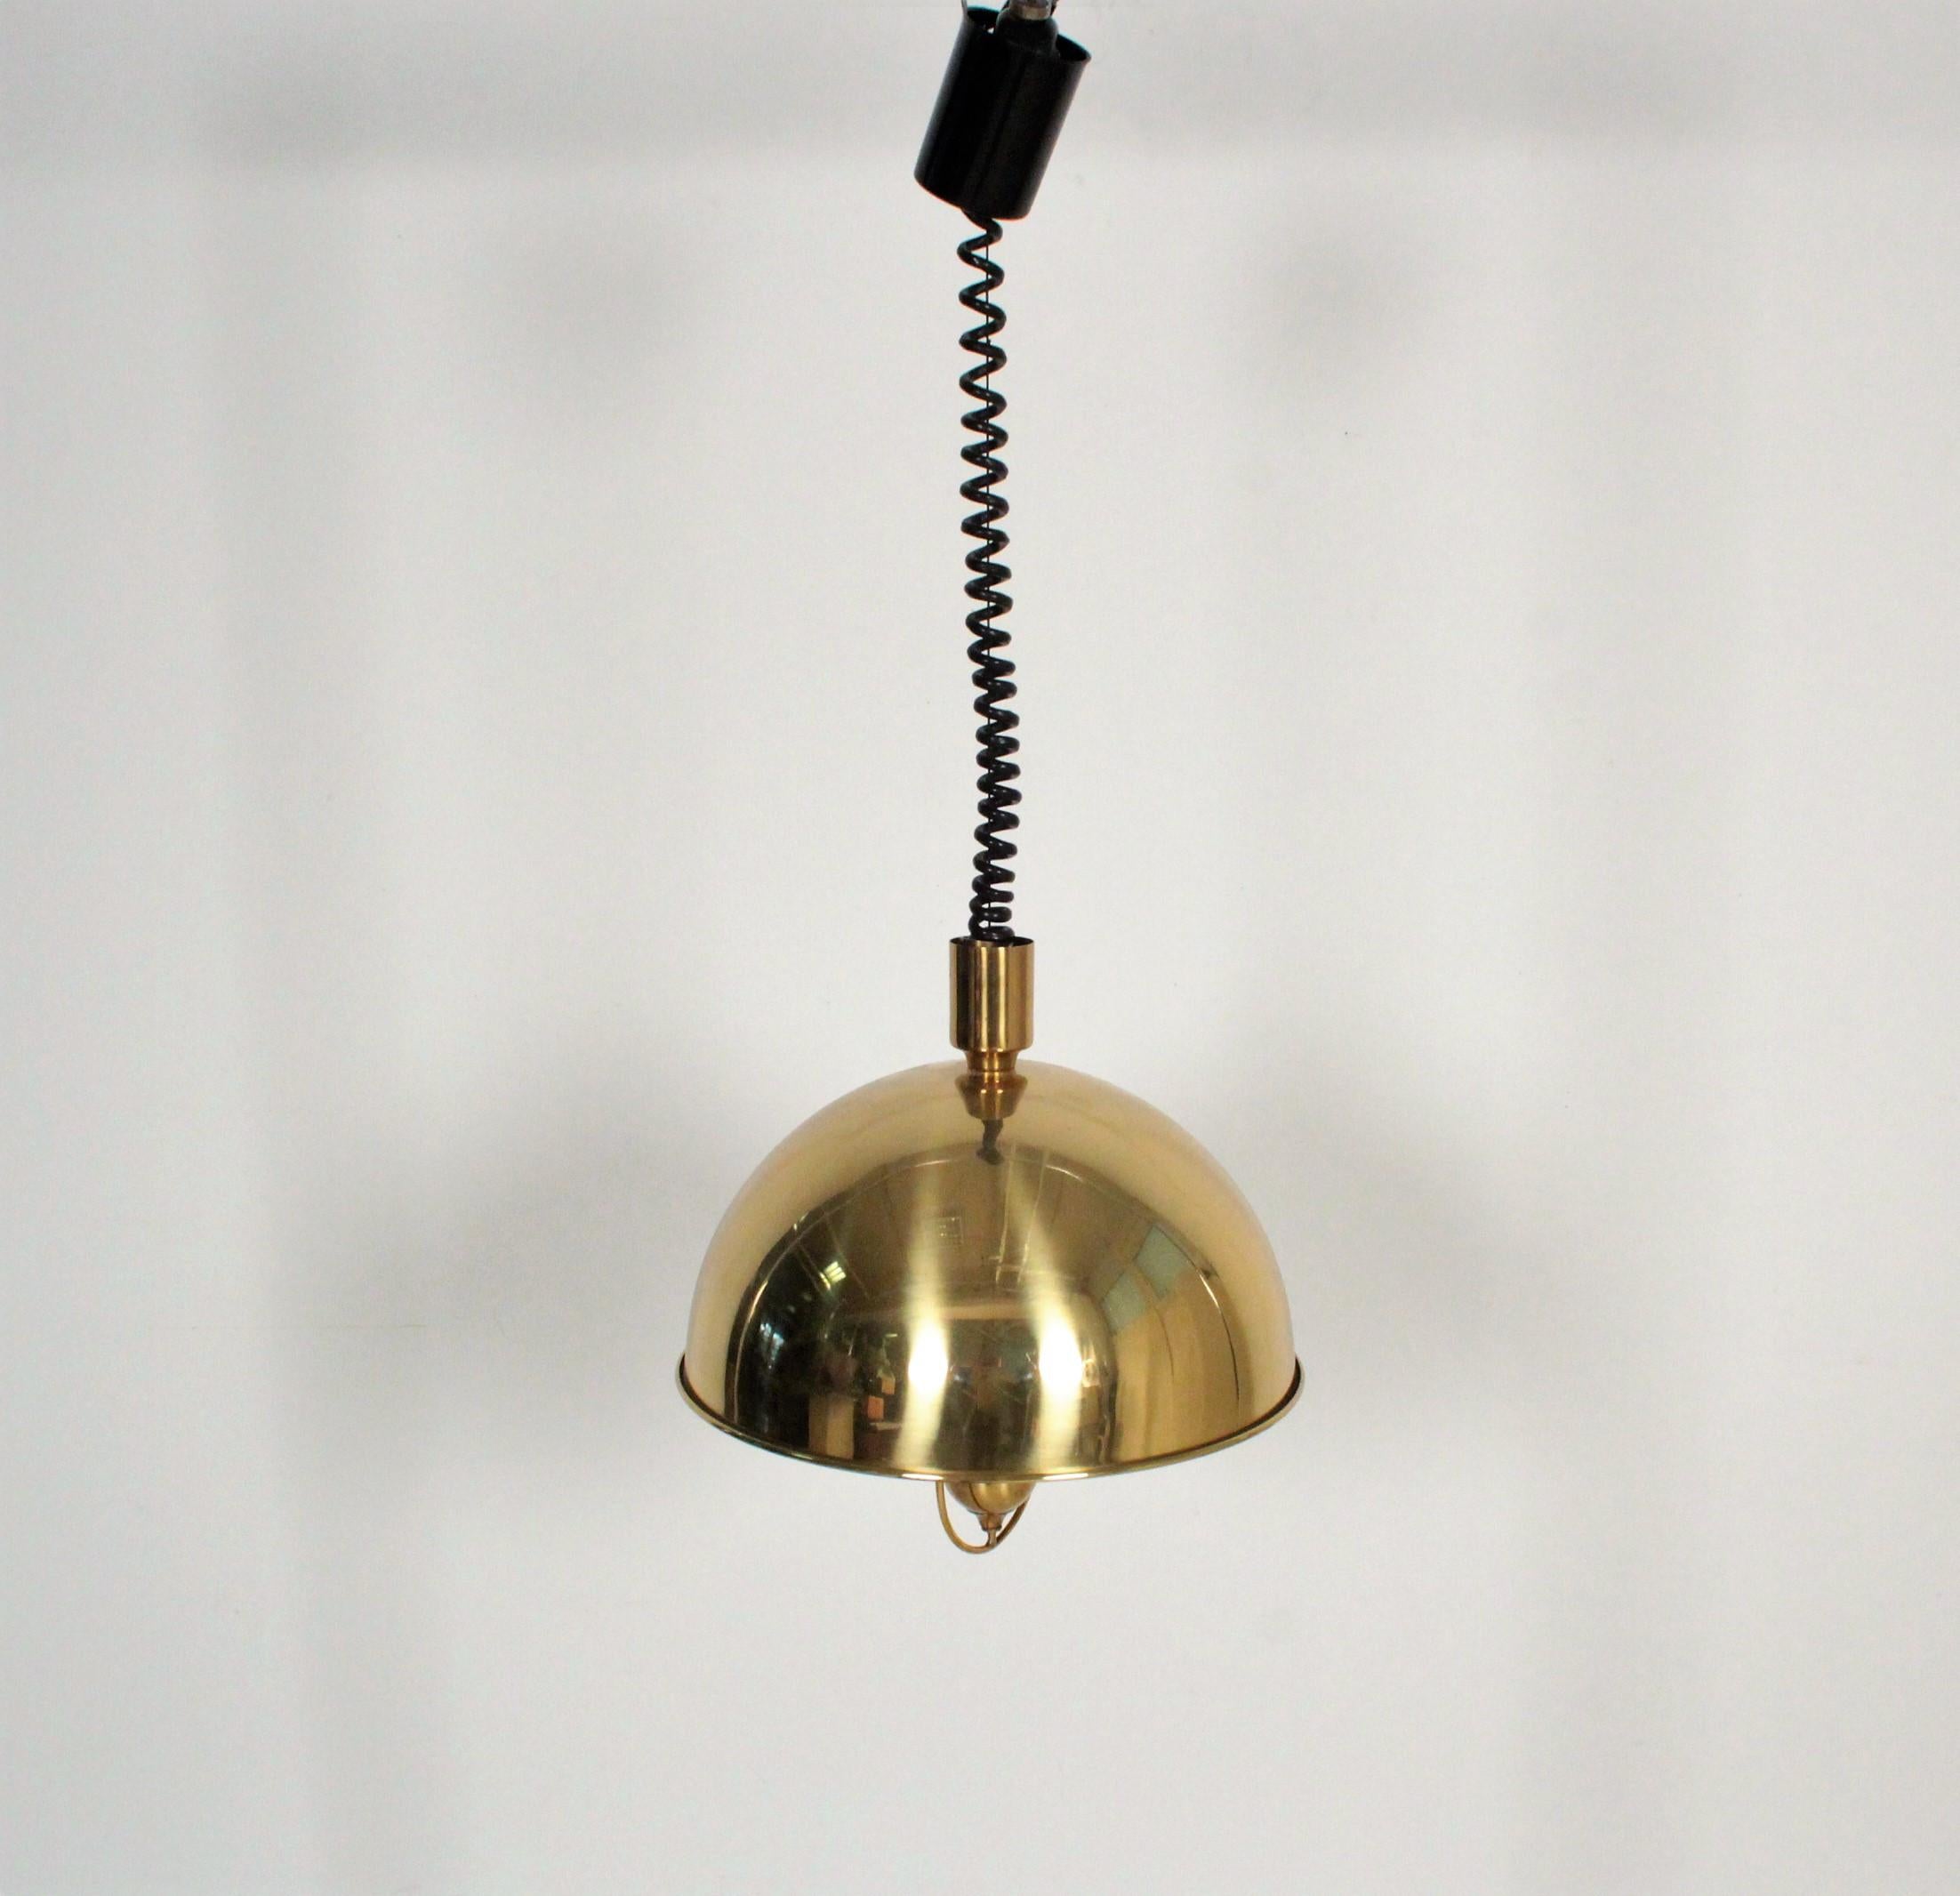 Florian Schulz Pendant Brass with Weight Light, Germany, 1970 For Sale 2